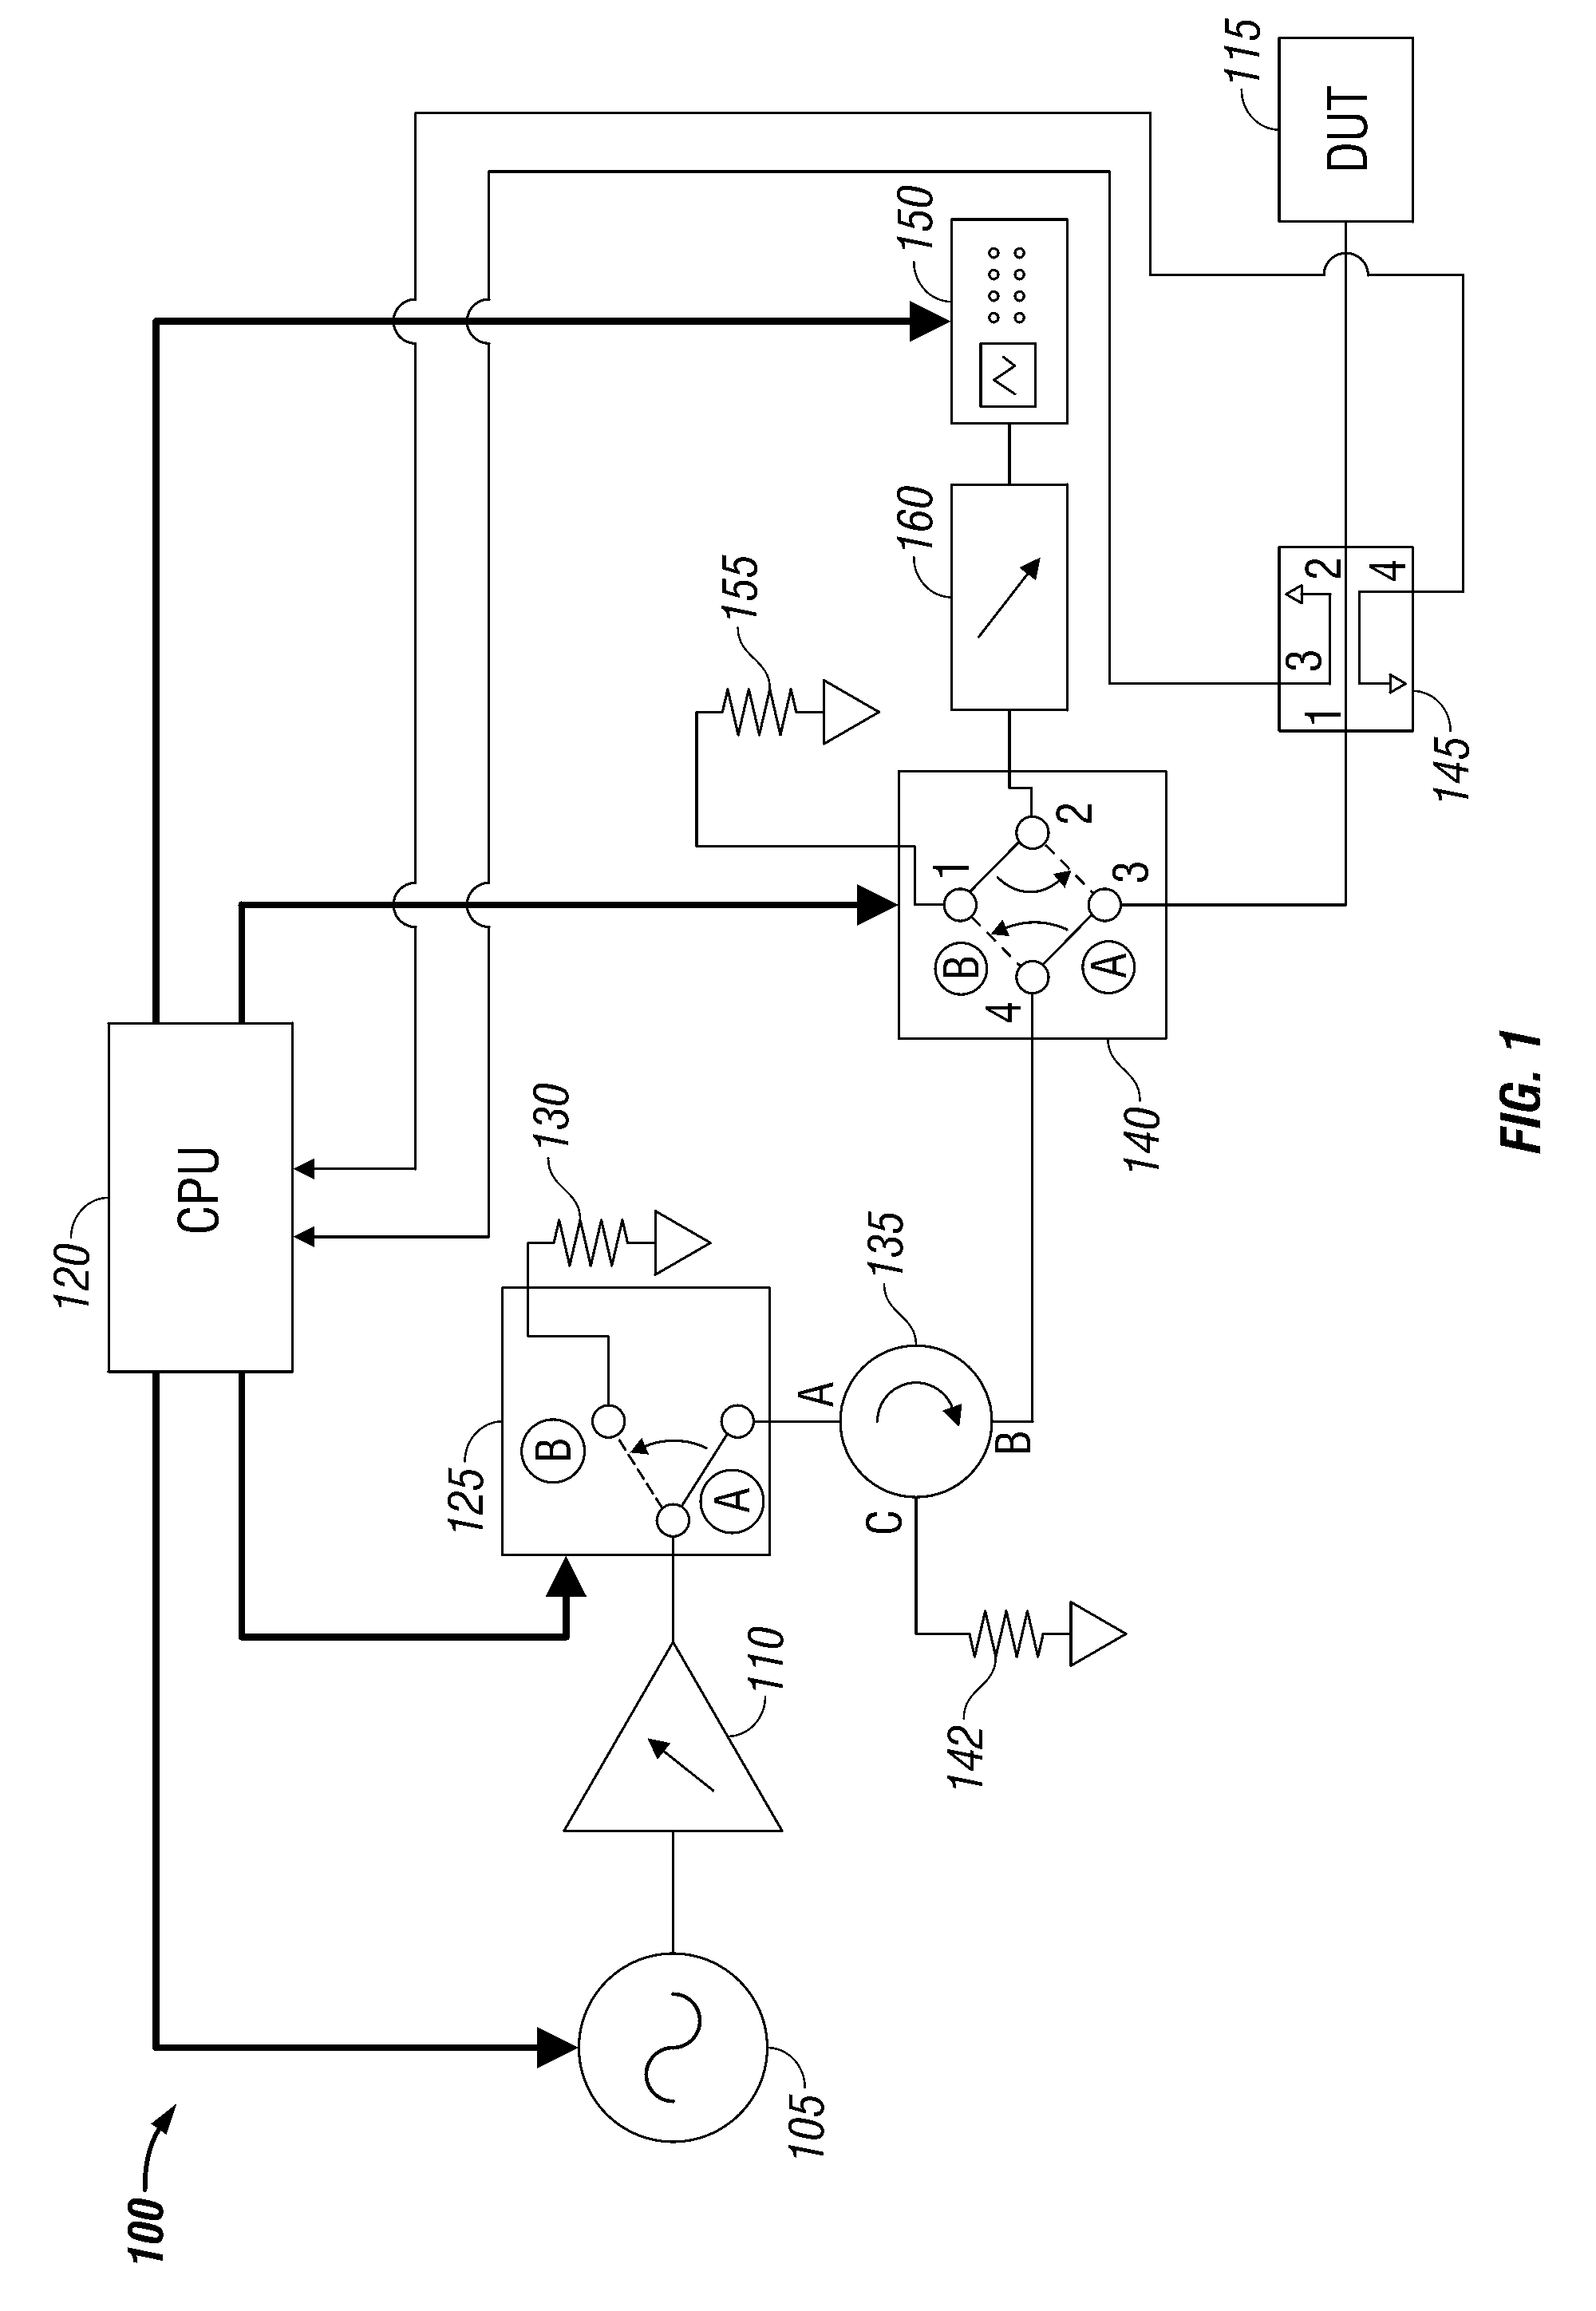 Microwave system calibration apparatus and method of use